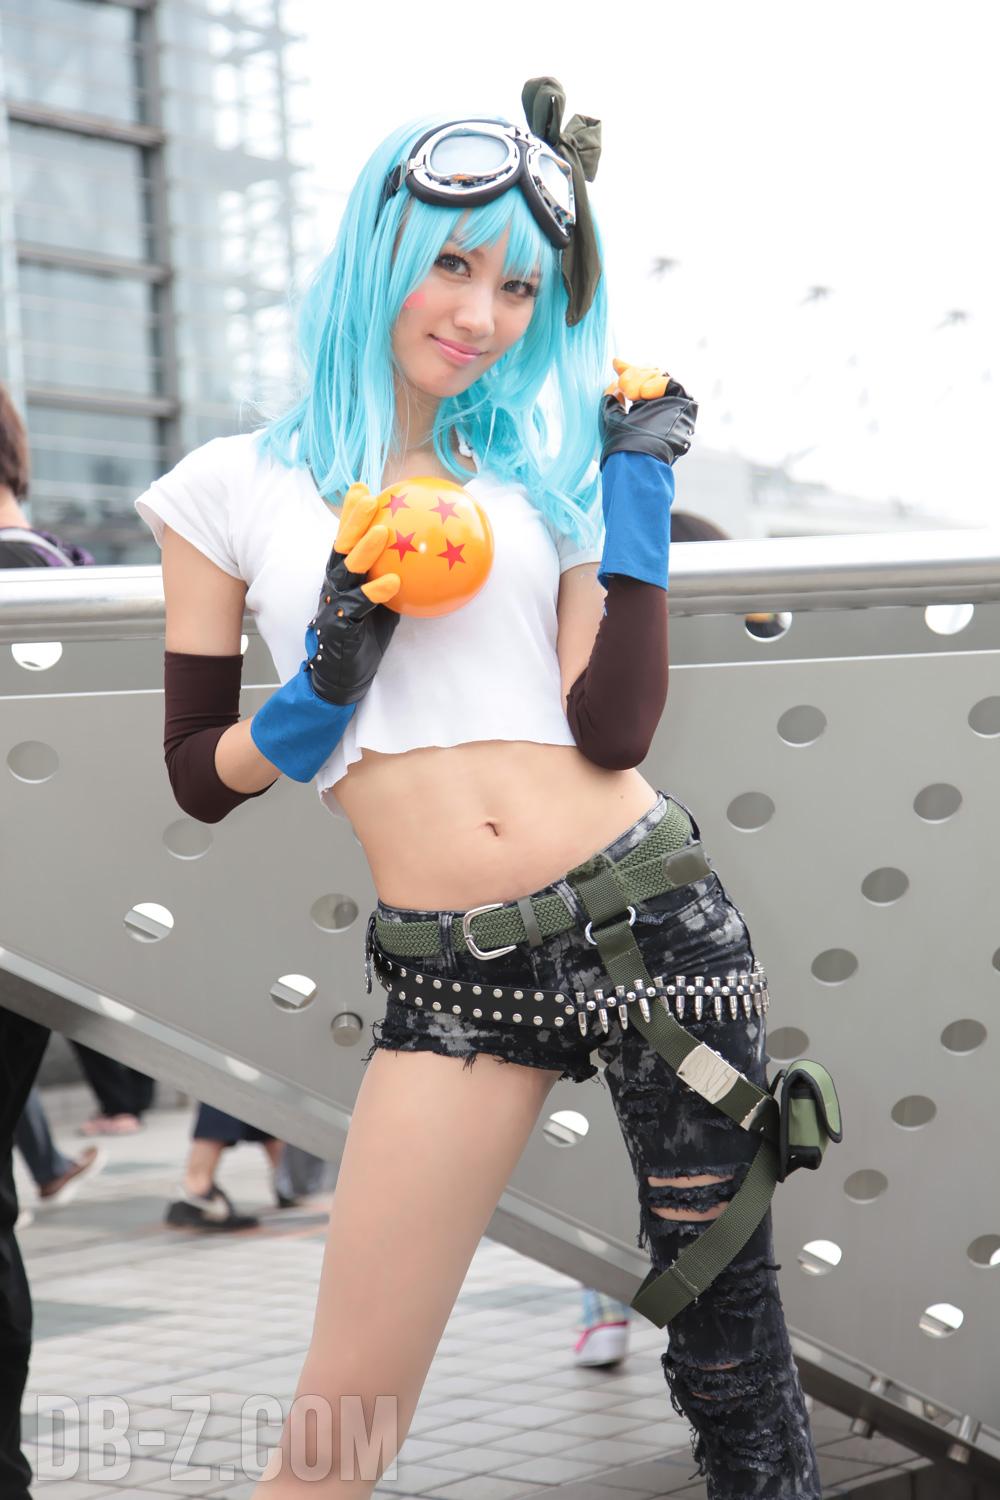 70+ Hot Pictures Of Bulma From Dragon Ball Z Are Sure To Get Your Heart Thumping Fast 179